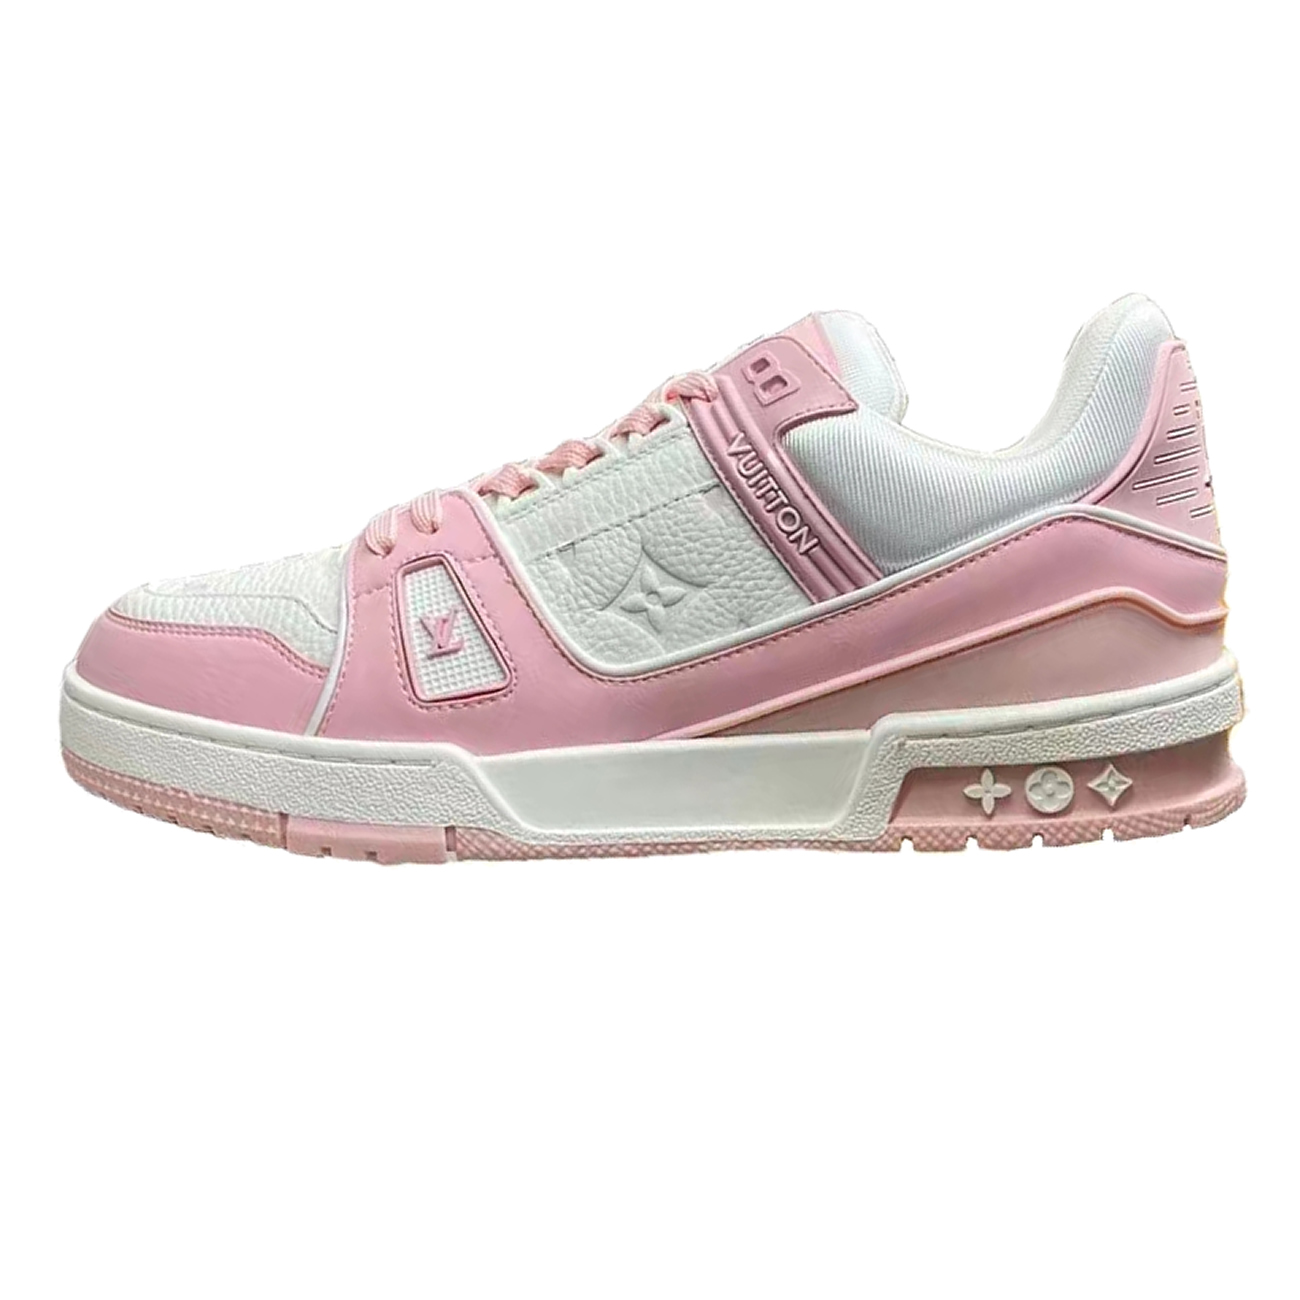 Lv Trainer Vuitton Sneaker Pink 1aa6w3 (11) - newkick.org